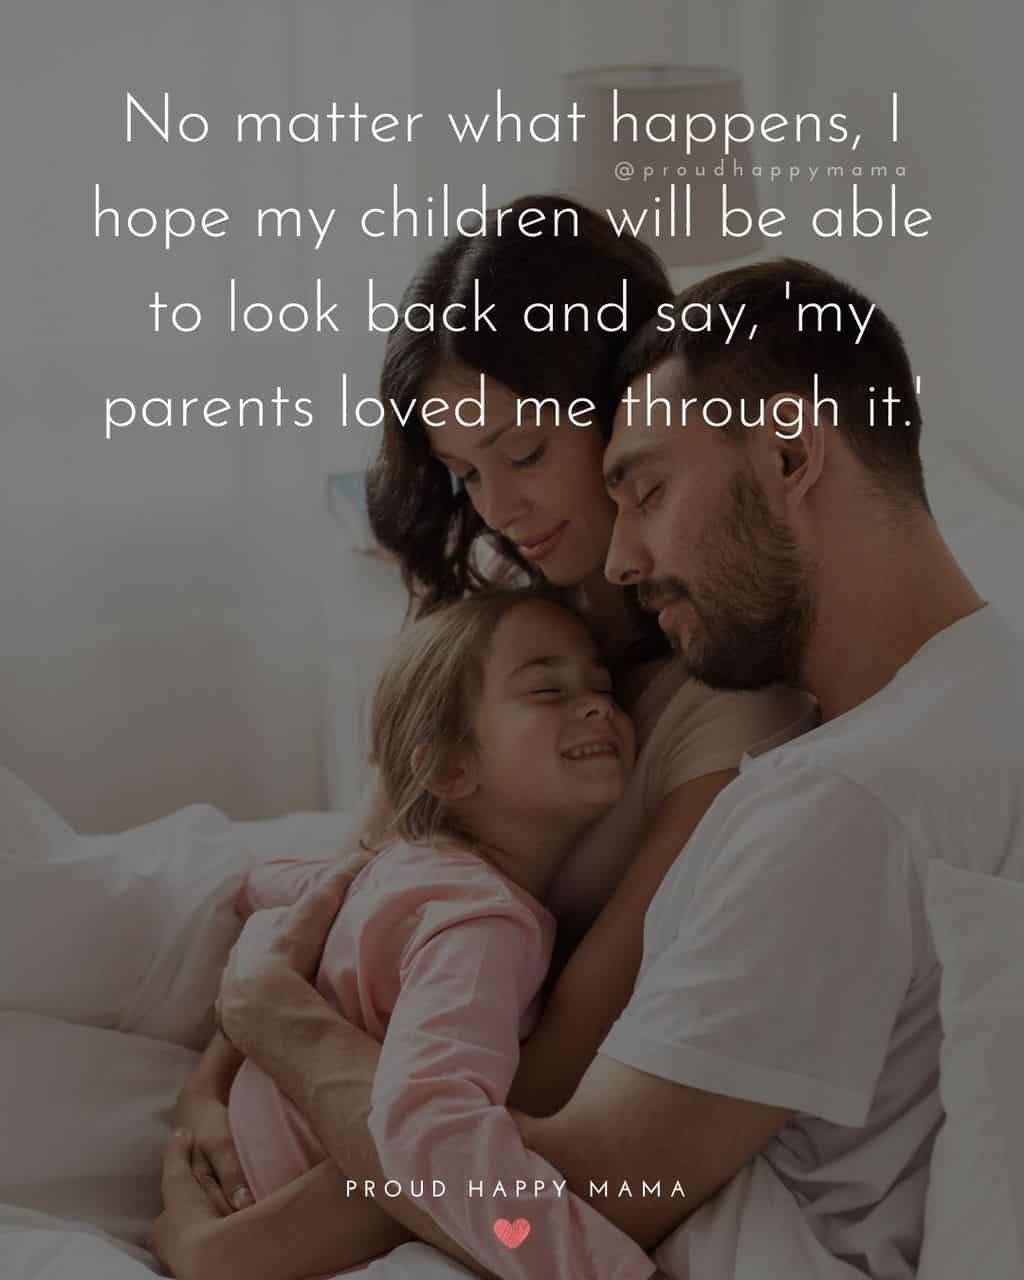 Parenting Quotes - No matter what happens, I hope my children will be able to look back and say, ‘my parents loved me through it.’’